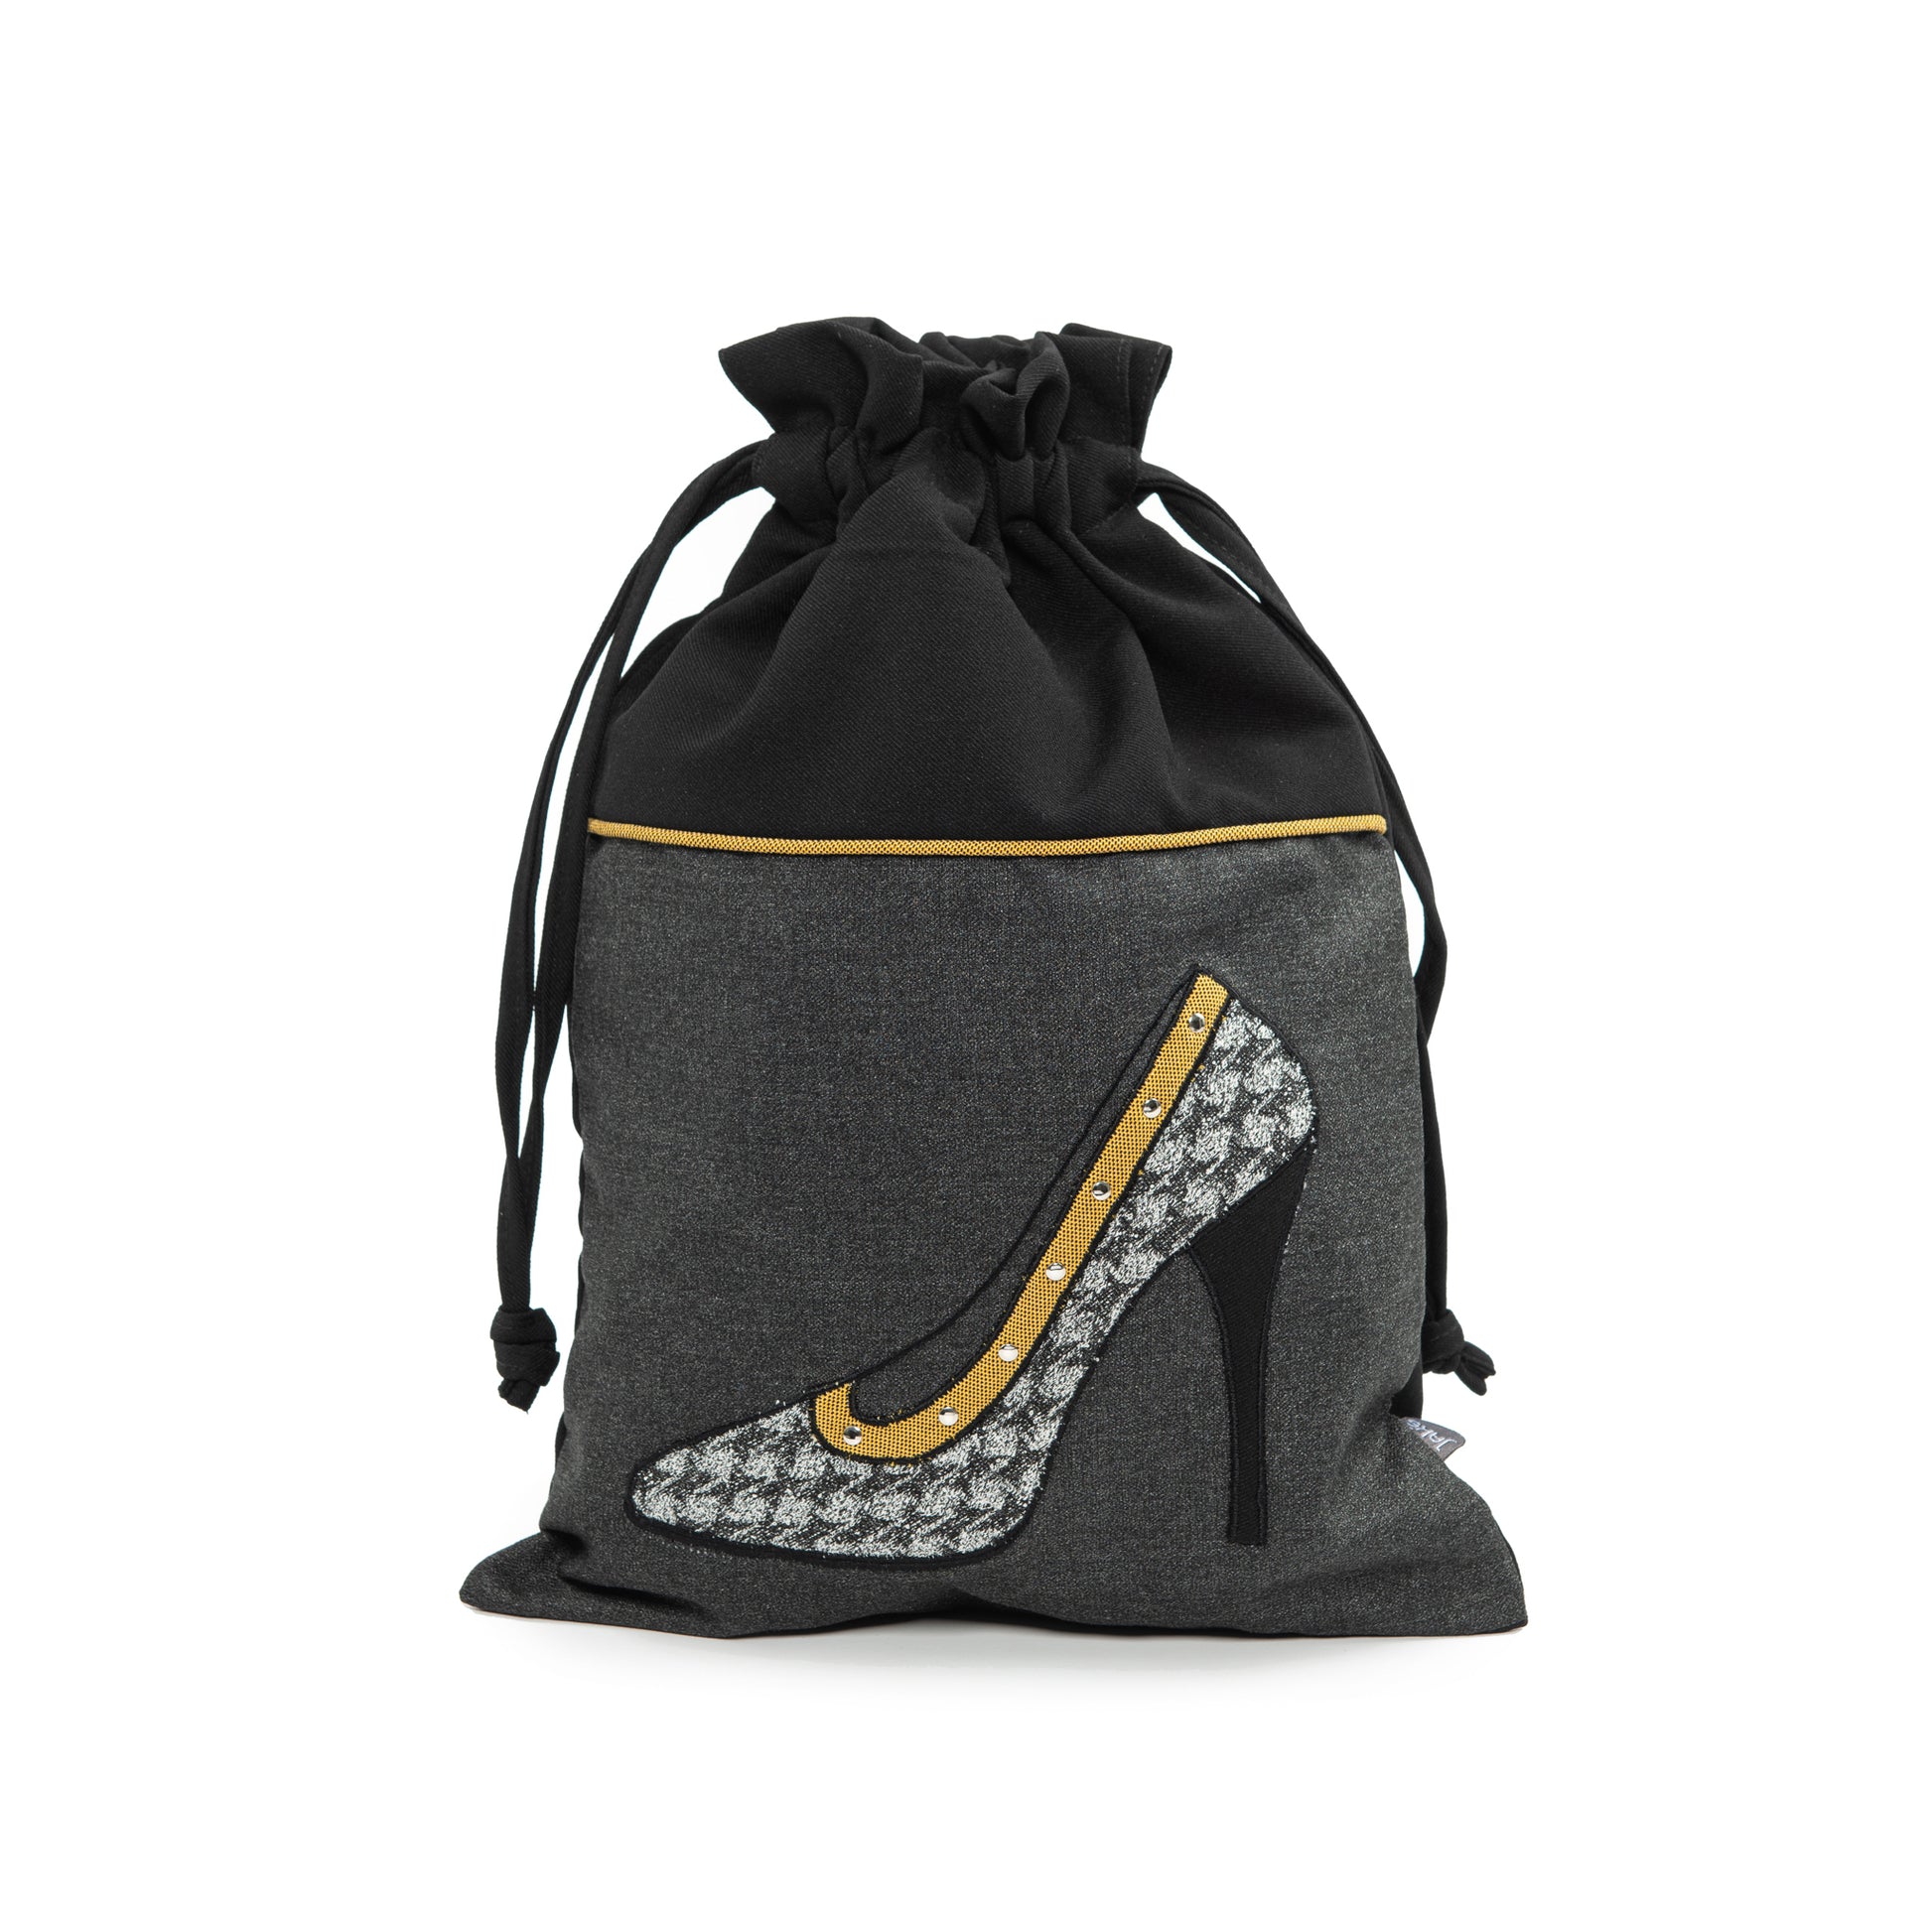 Shoe Bag with Camel and Grey High Heel